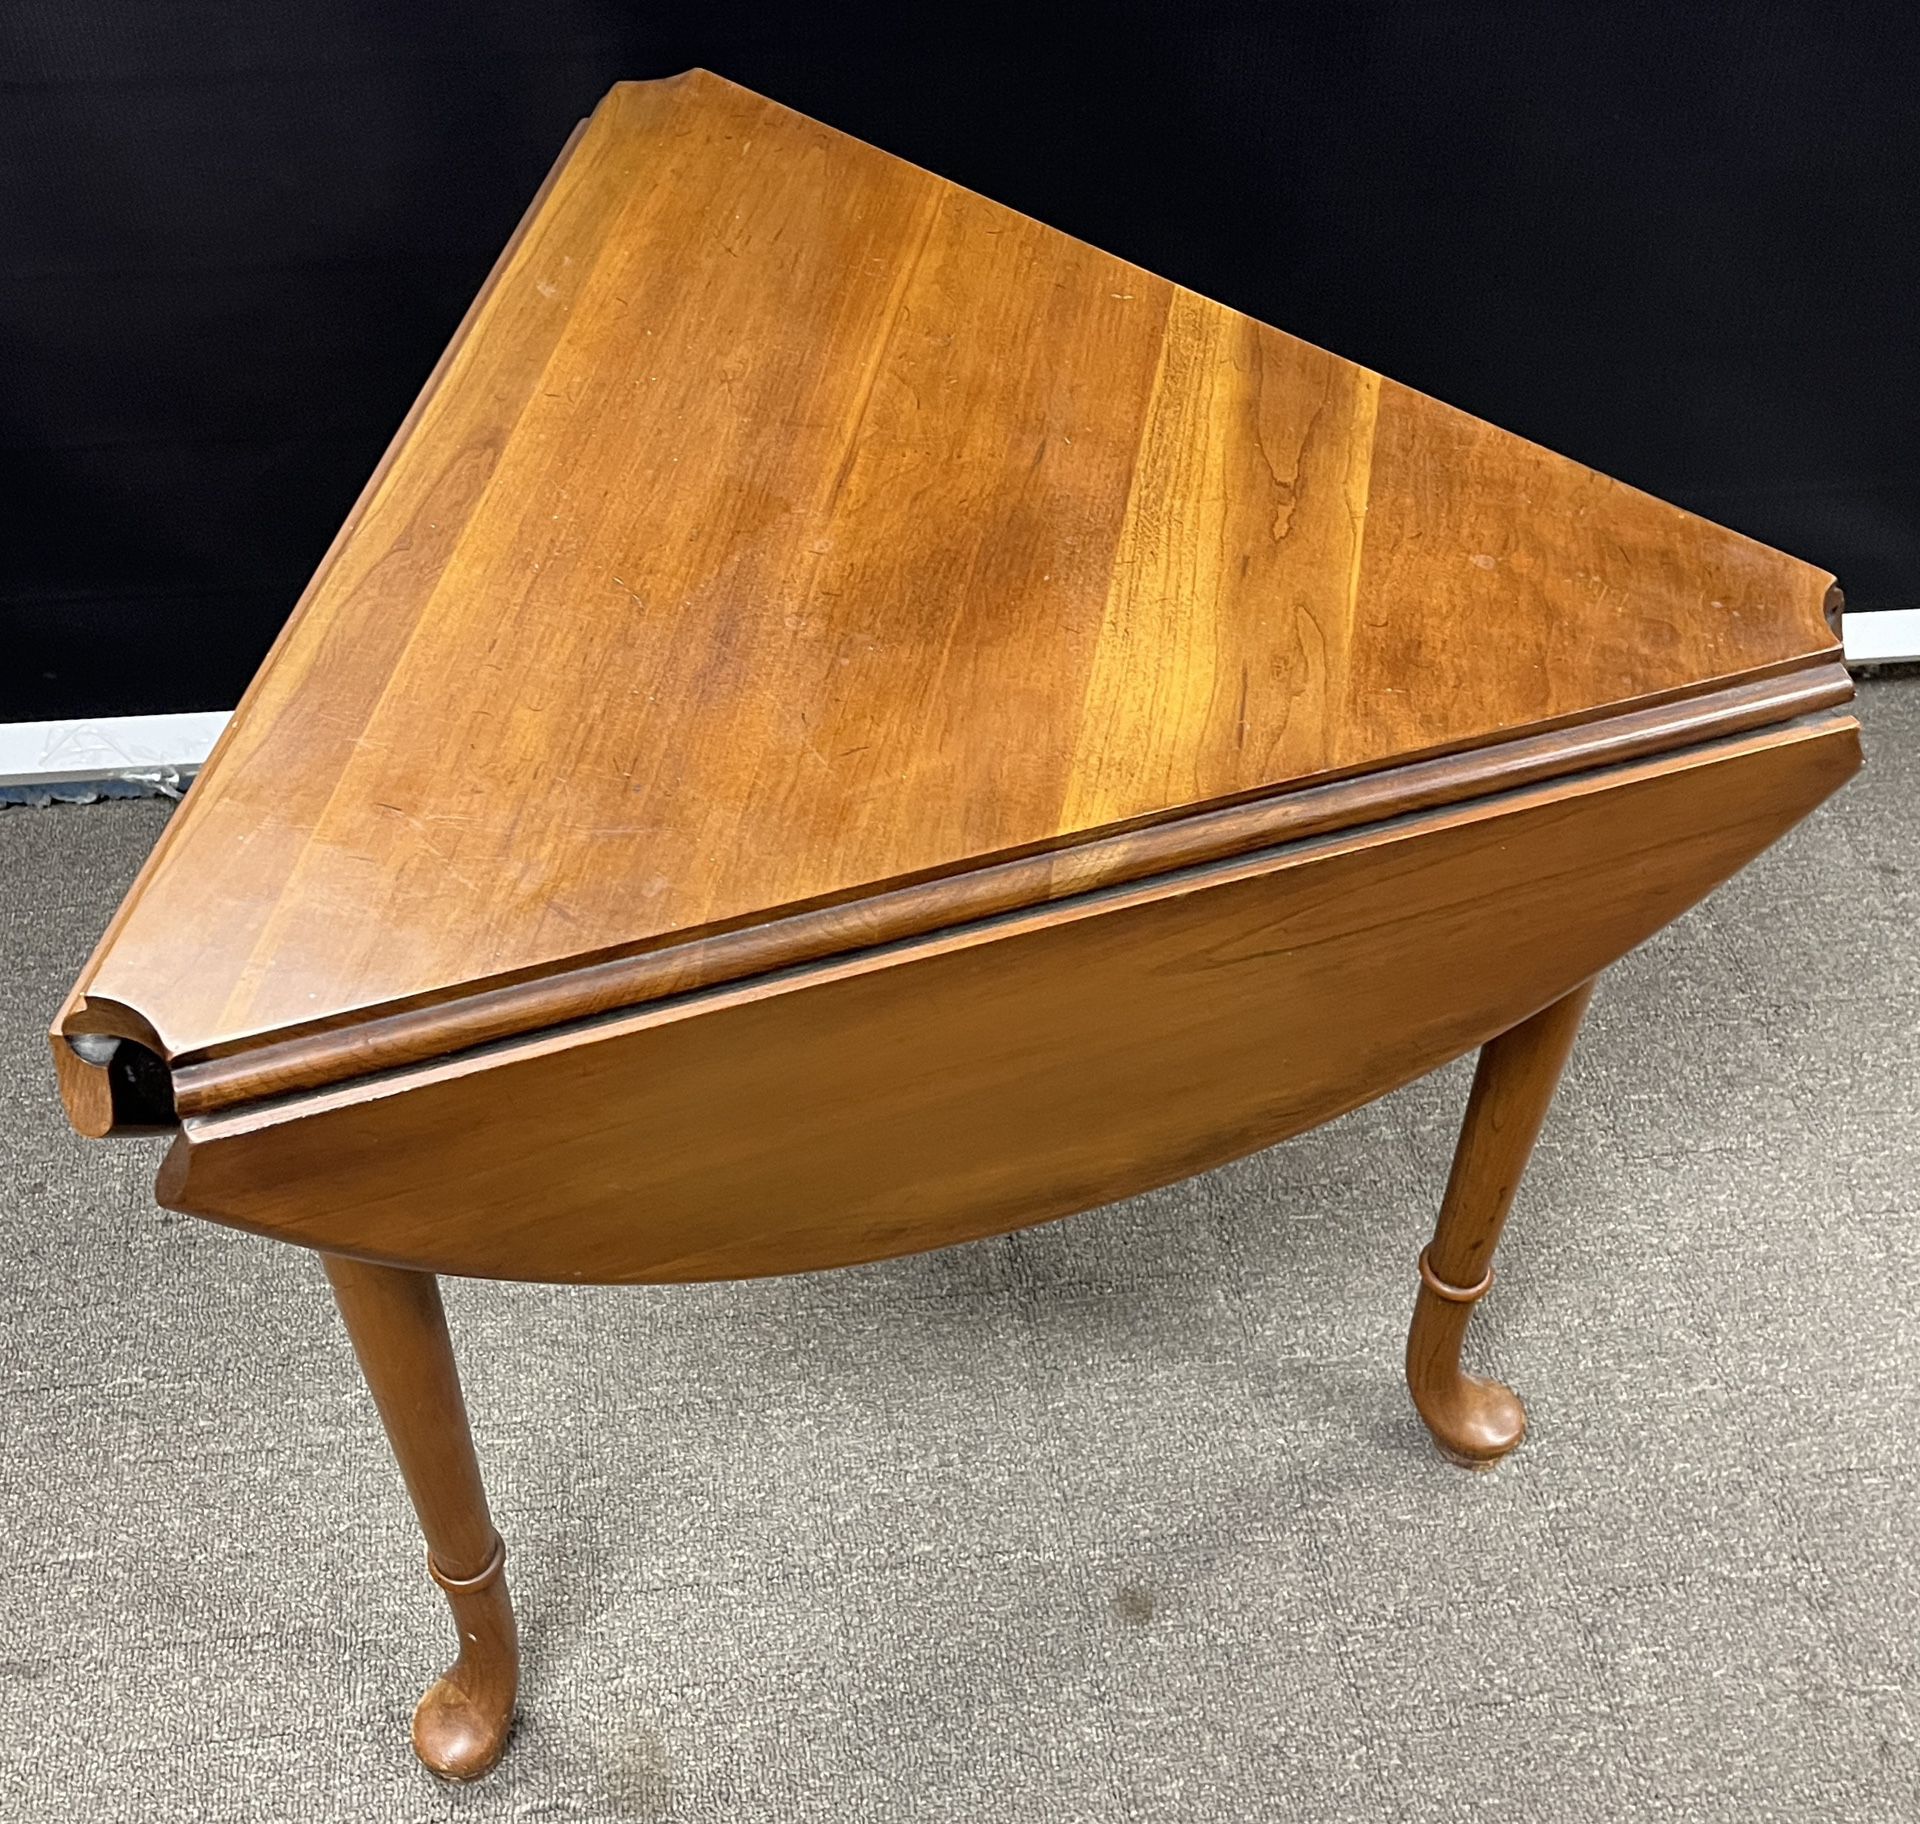 Statton Furniture Centennial Cherry Triangle Drop Leaf Side Table. Queen Anne Trifold Drop Leaf